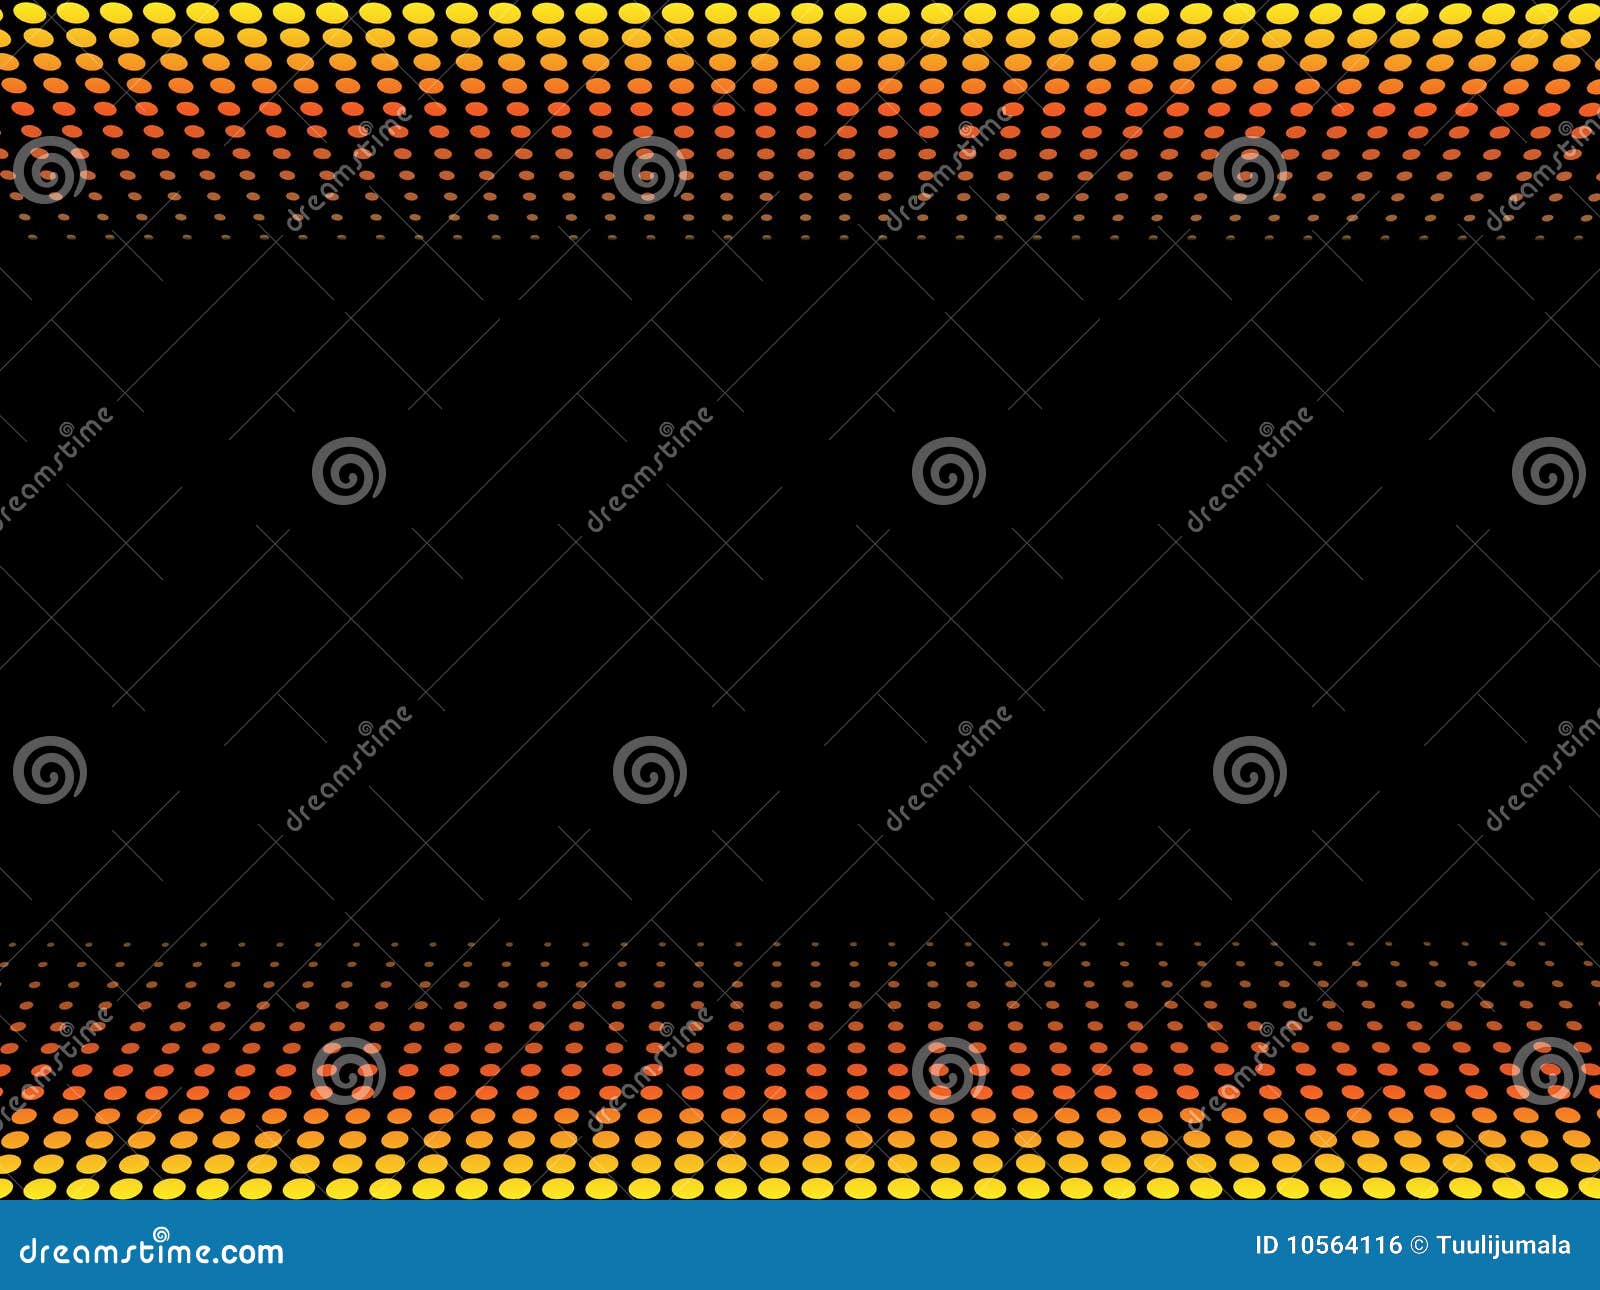 Download Anime Fire Halftone Royalty-Free Stock Illustration Image